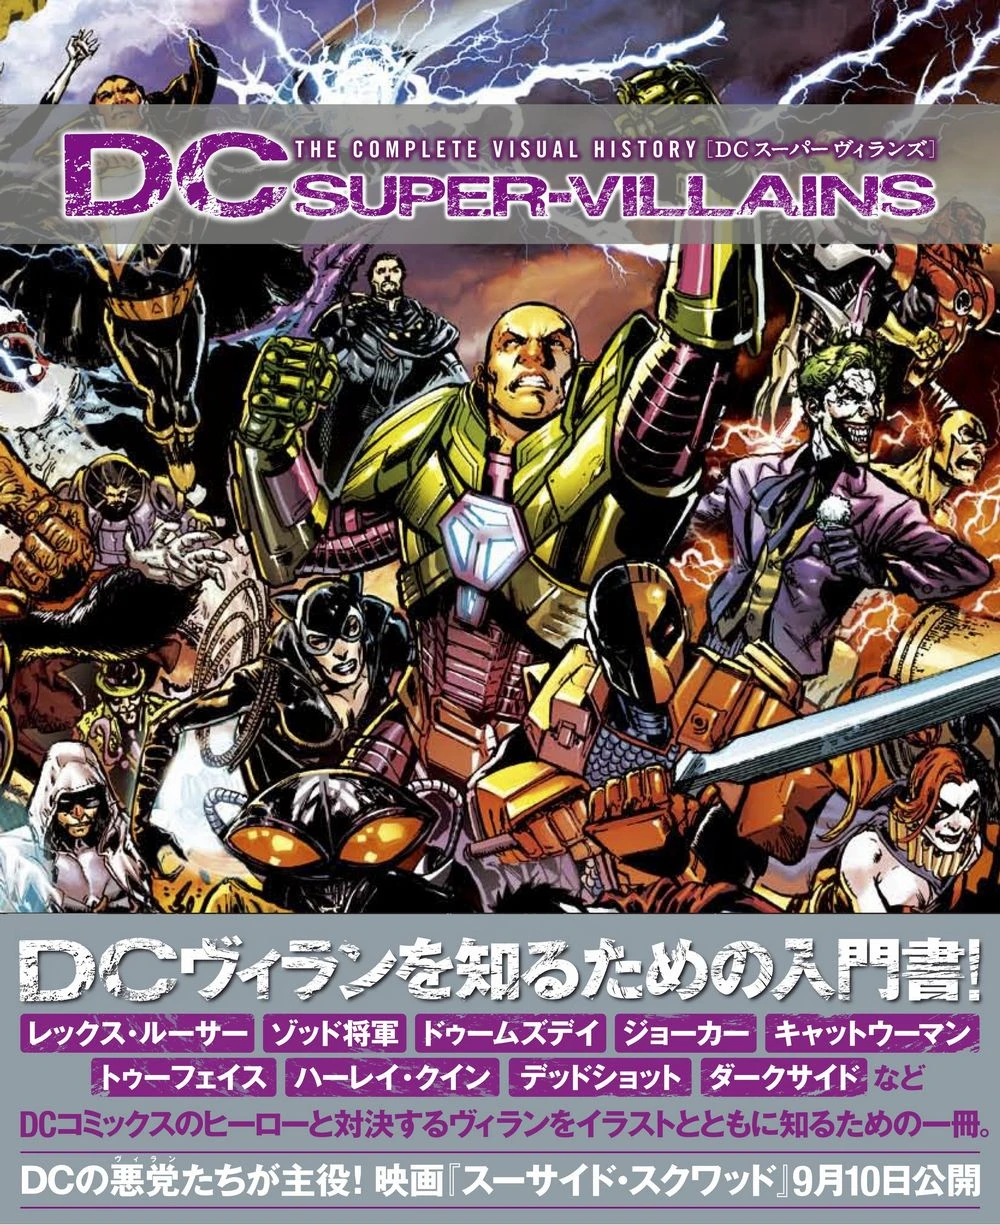 『DCスーパーヴィランズ -THE COMPLETE VISUAL HISTORY-』